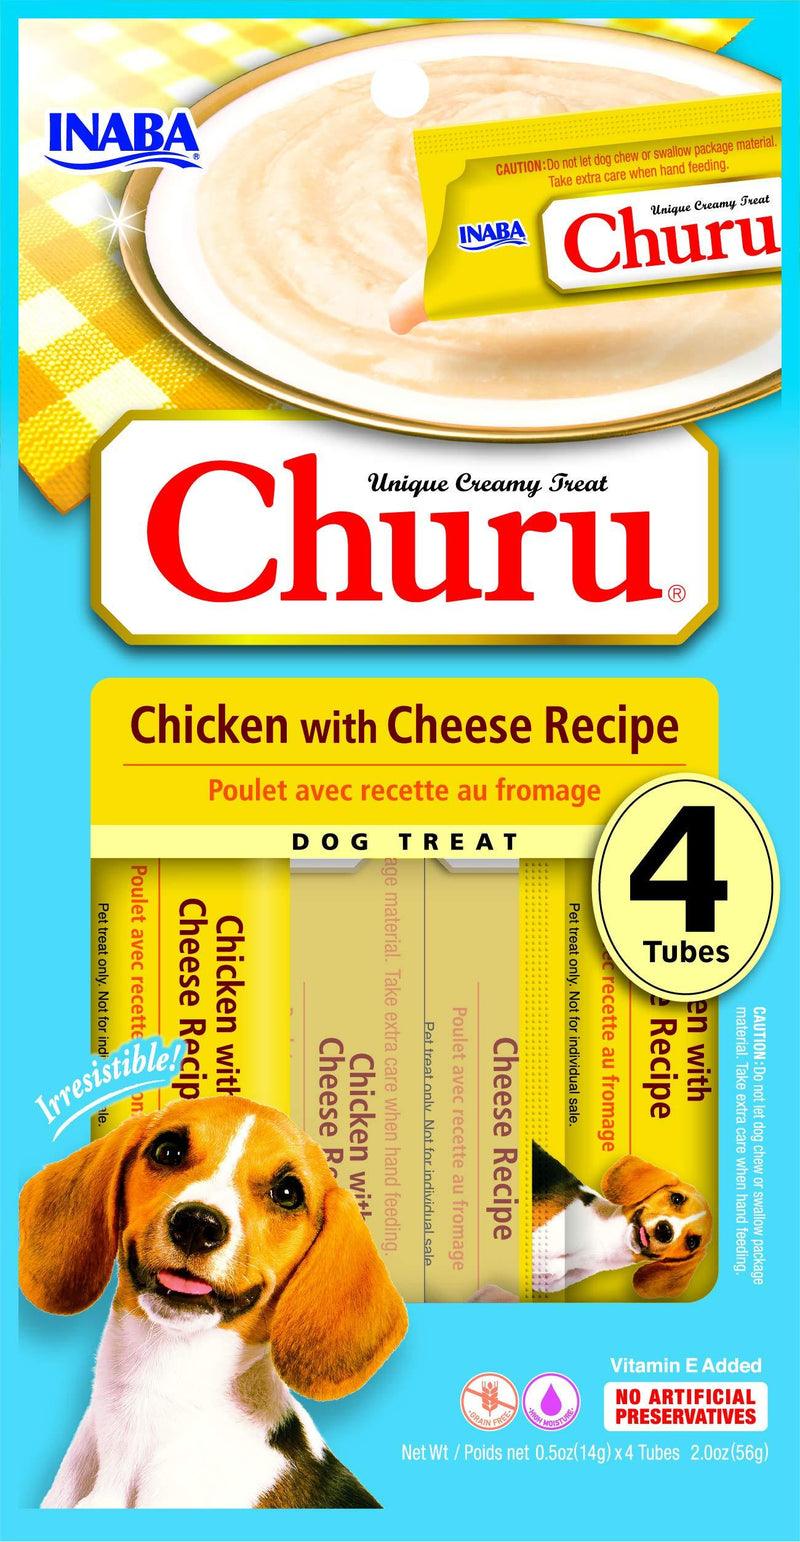 [Australia] - Churu Lickable Treat for Dogs - Chicken with Cheese Recipe 32 Tubes (8 Packs of 4 Tubes) 